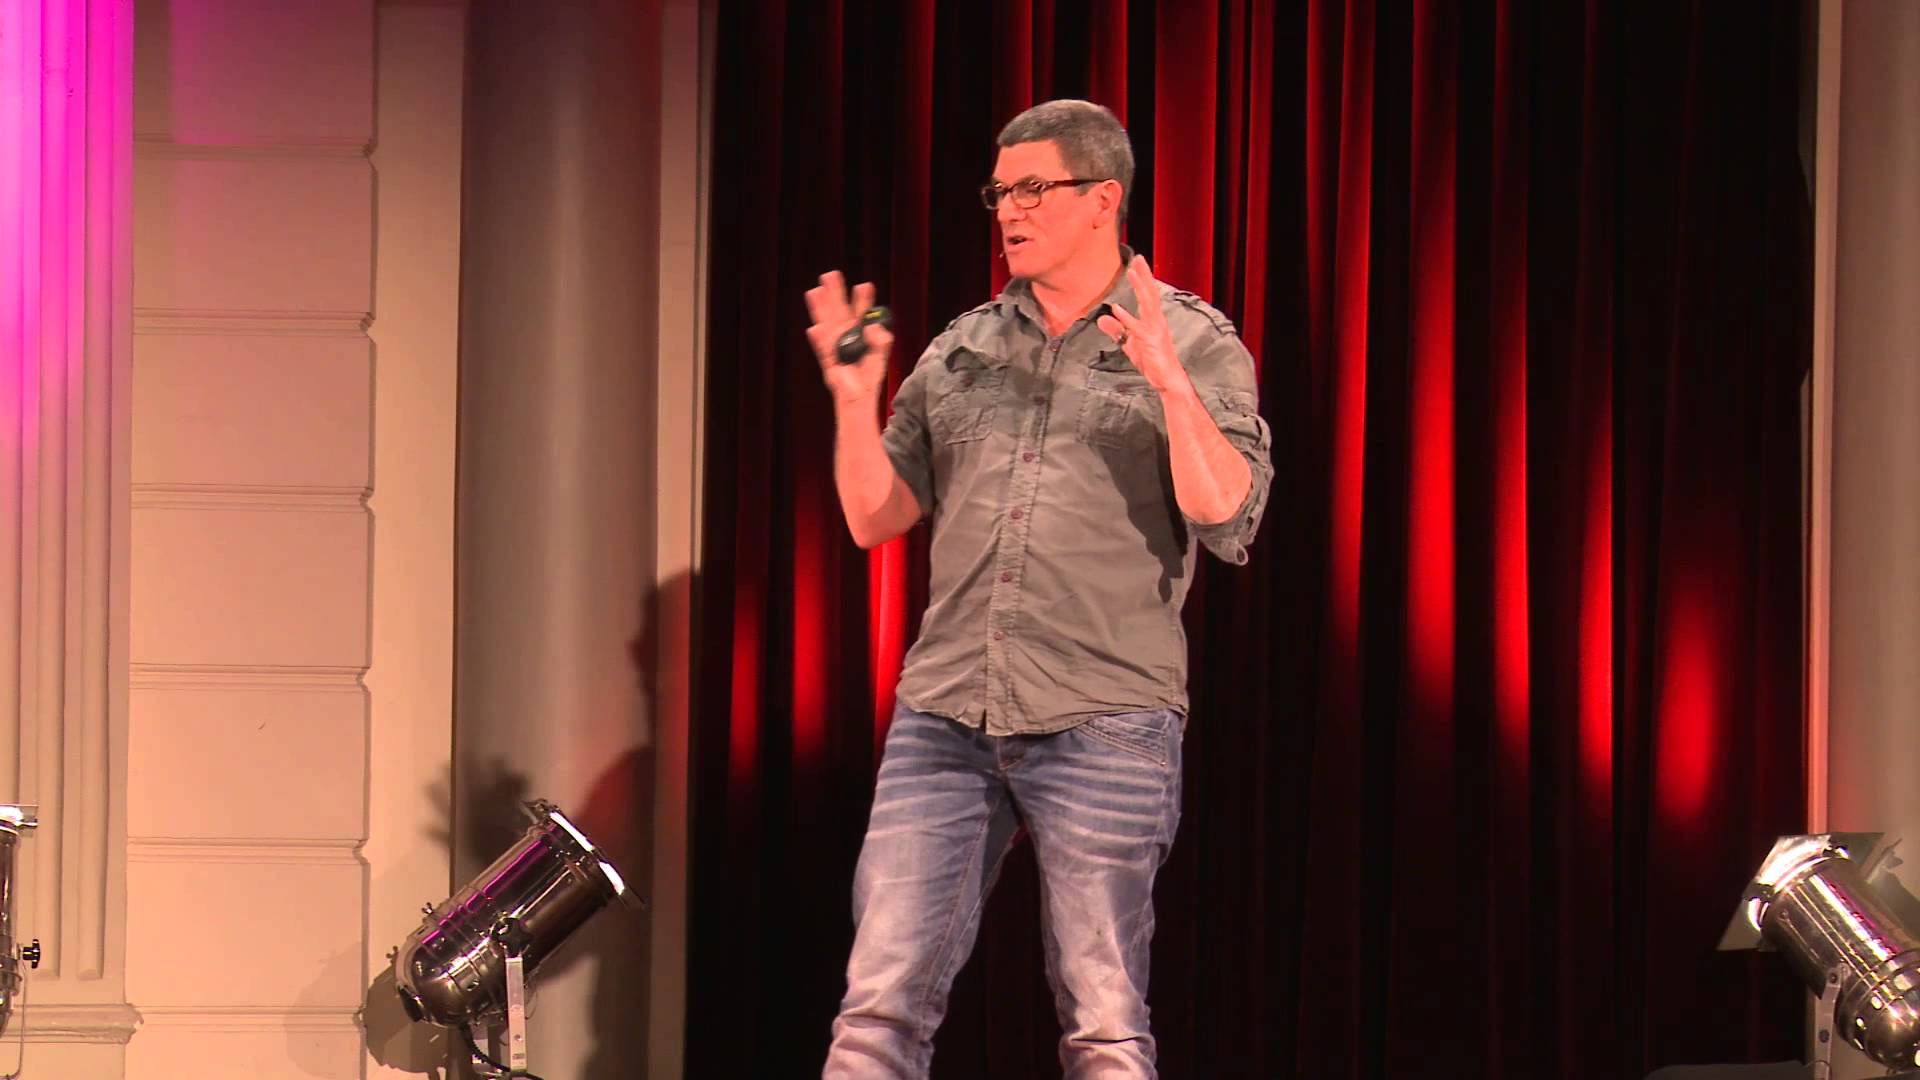 Games as design language for teaching and learning: Willem Jan Renger at TEDxAmsterdamED 2013